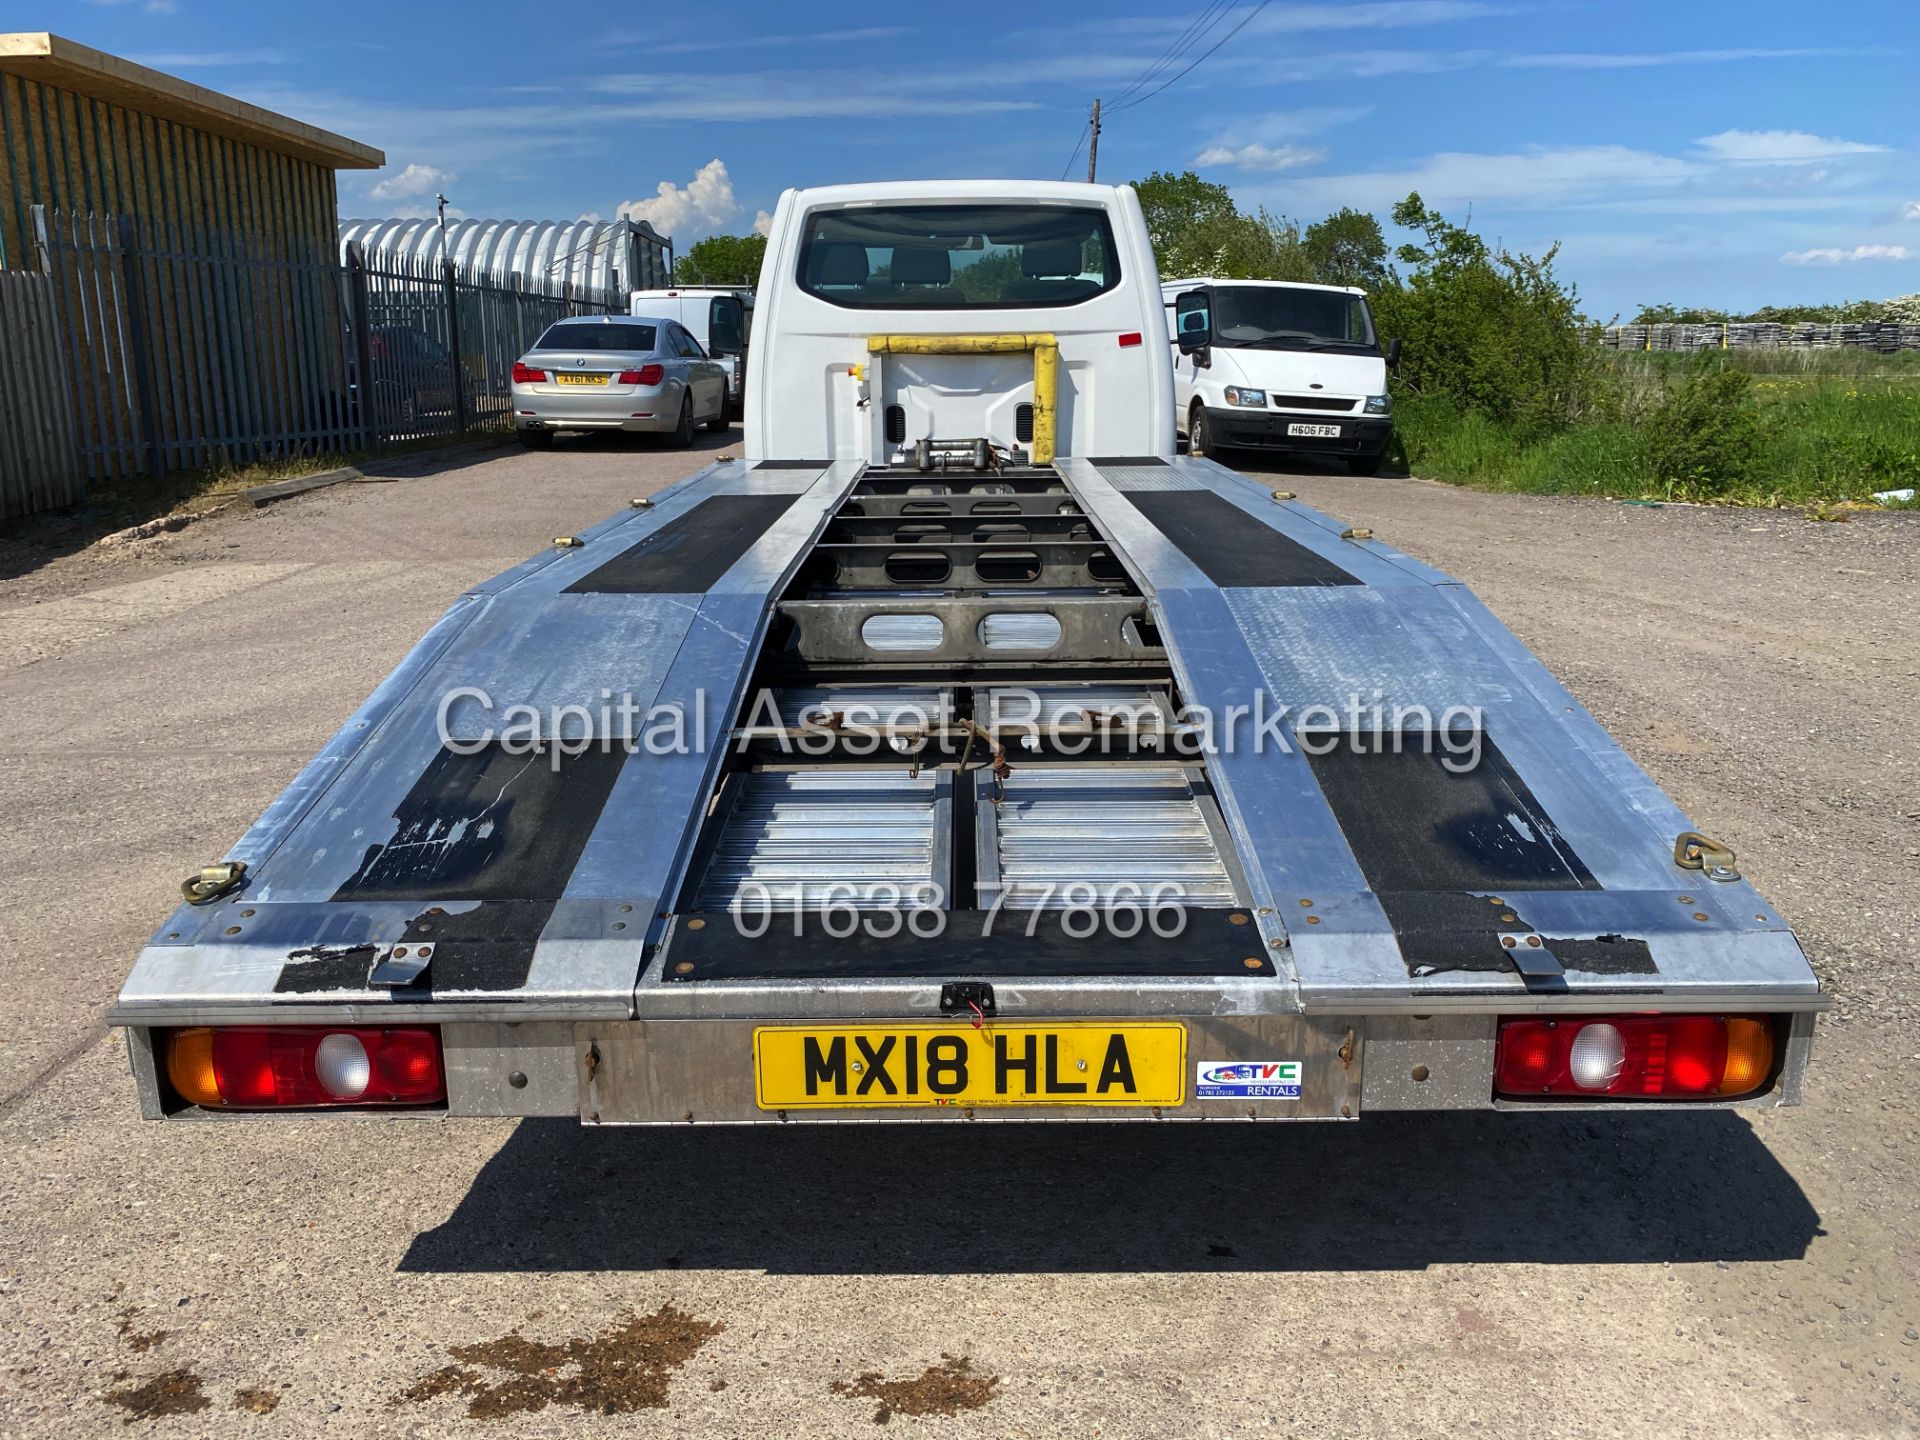 VOLKSWAGEN TRANSPORTER T6 2.0TDI "140" LWB CAR TRANSPORTER / RECOVERY TRUCK- 18 REG - AIR CON - WOW! - Image 15 of 25